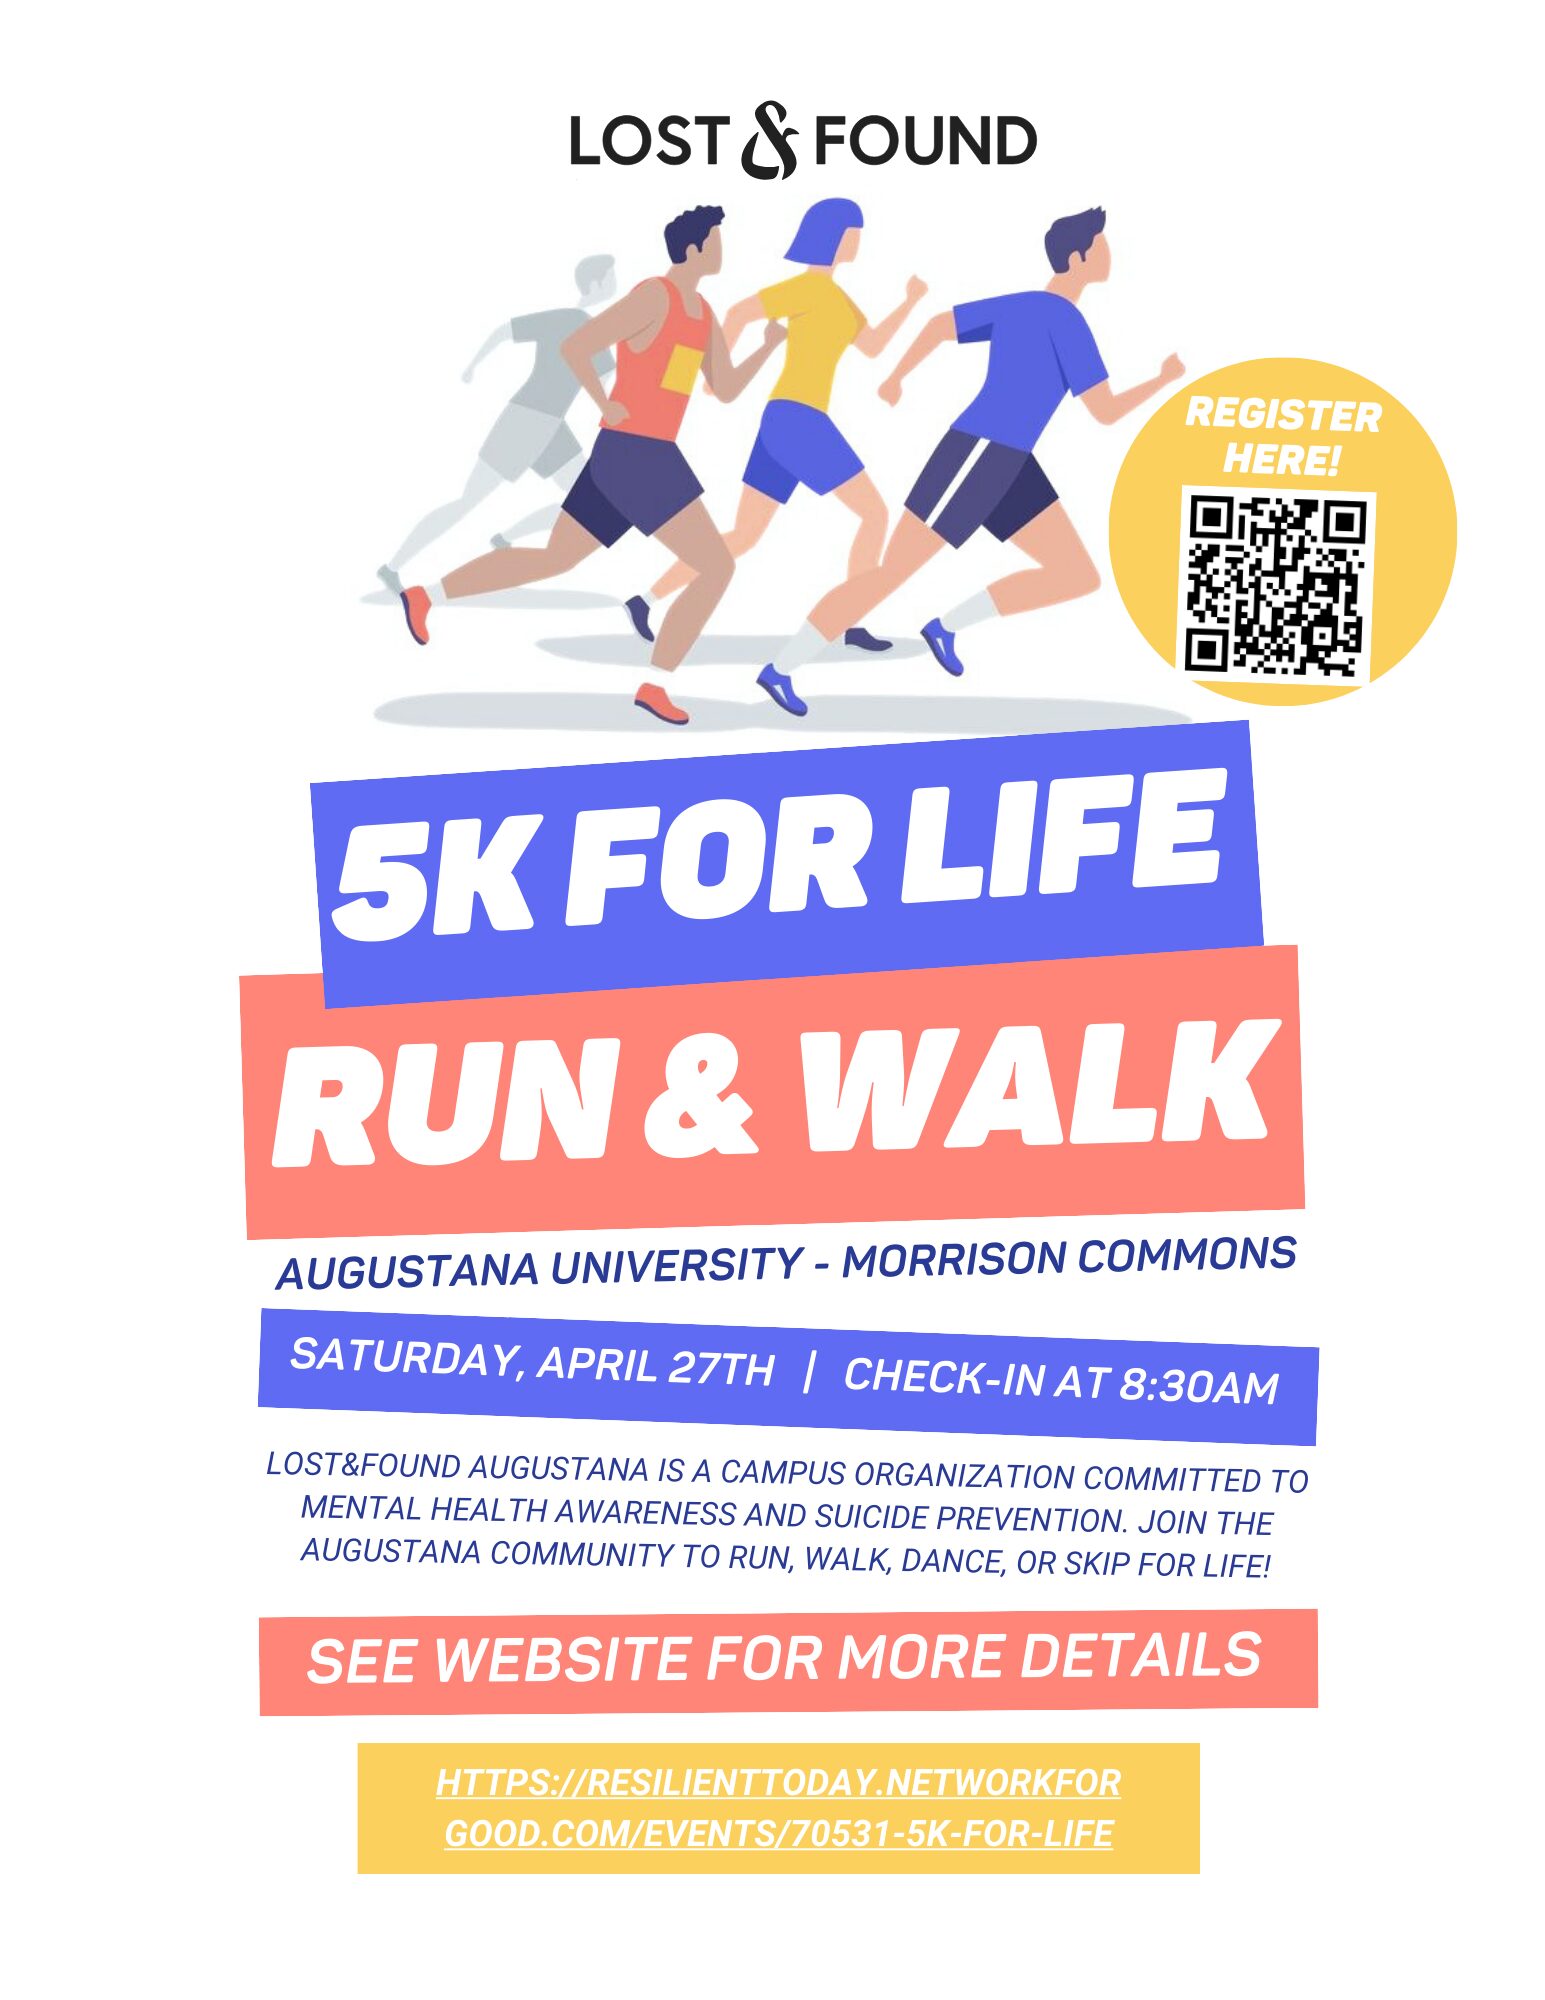 Lost&Found 5K for Life Run & Walk. Augustana University - Morrison Commons. Saturday, April 27. Check-in at 8:30 a.m. Lost&Found Augustana is a campus organization committed to mental health awareness and suicide prevention. Join the Augustana community to run, walk, dance or skip for life! See website for more details. https://resilienttoday.networkforgood.com/events/70531-5k-for-life